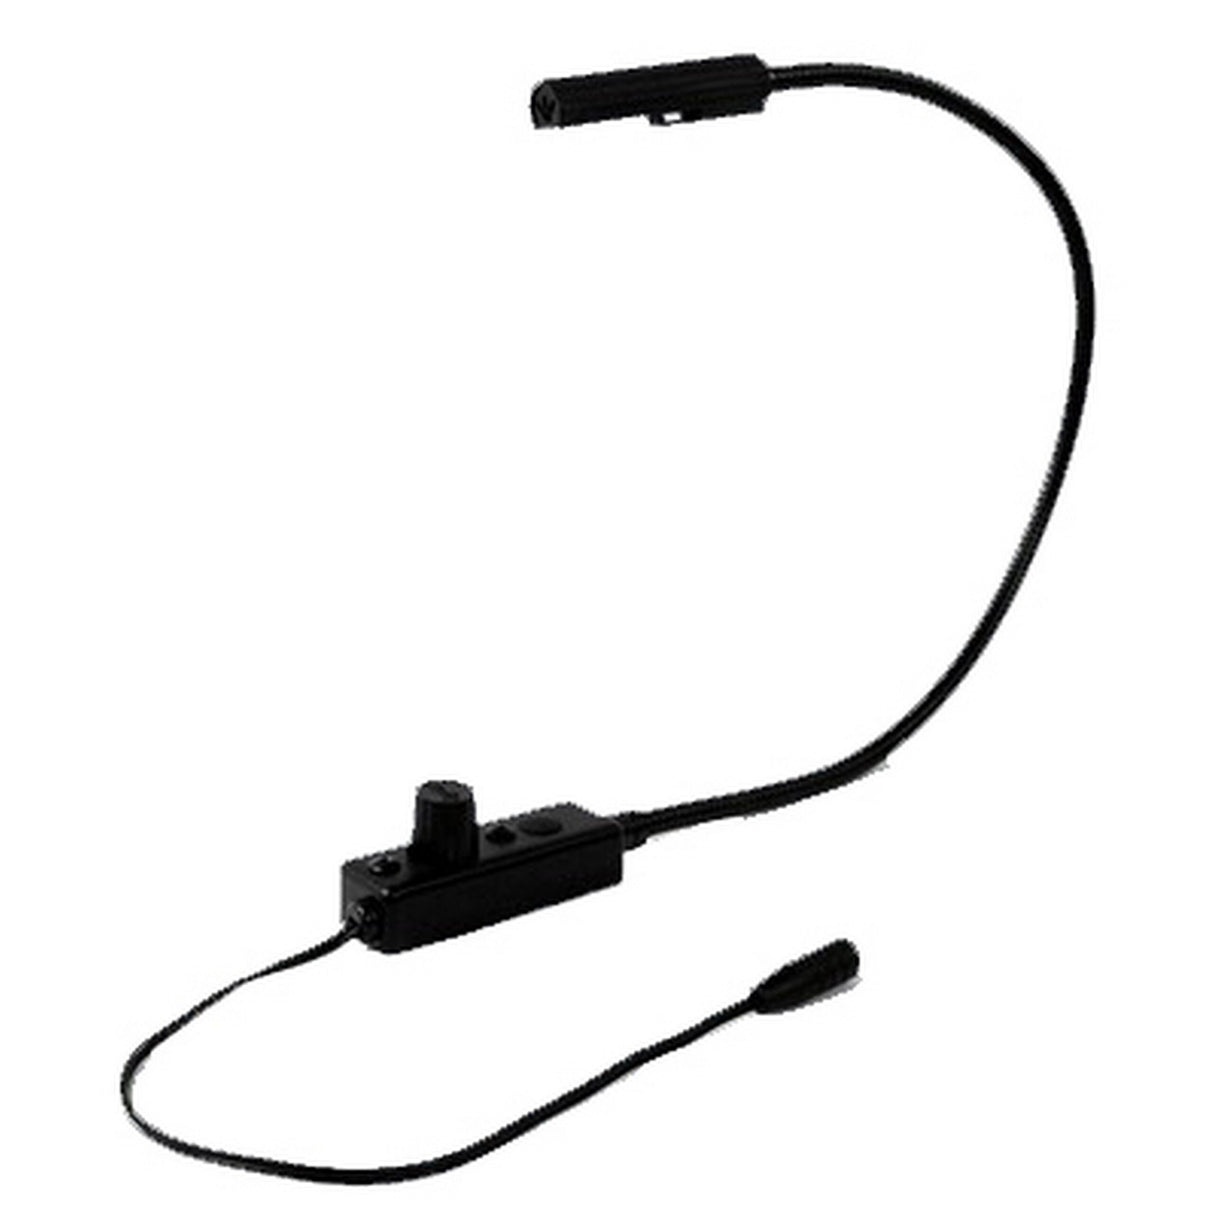 Littlite L-7/18A-LED 18 Inch LED Gooseneck Lampset with No Power Supply